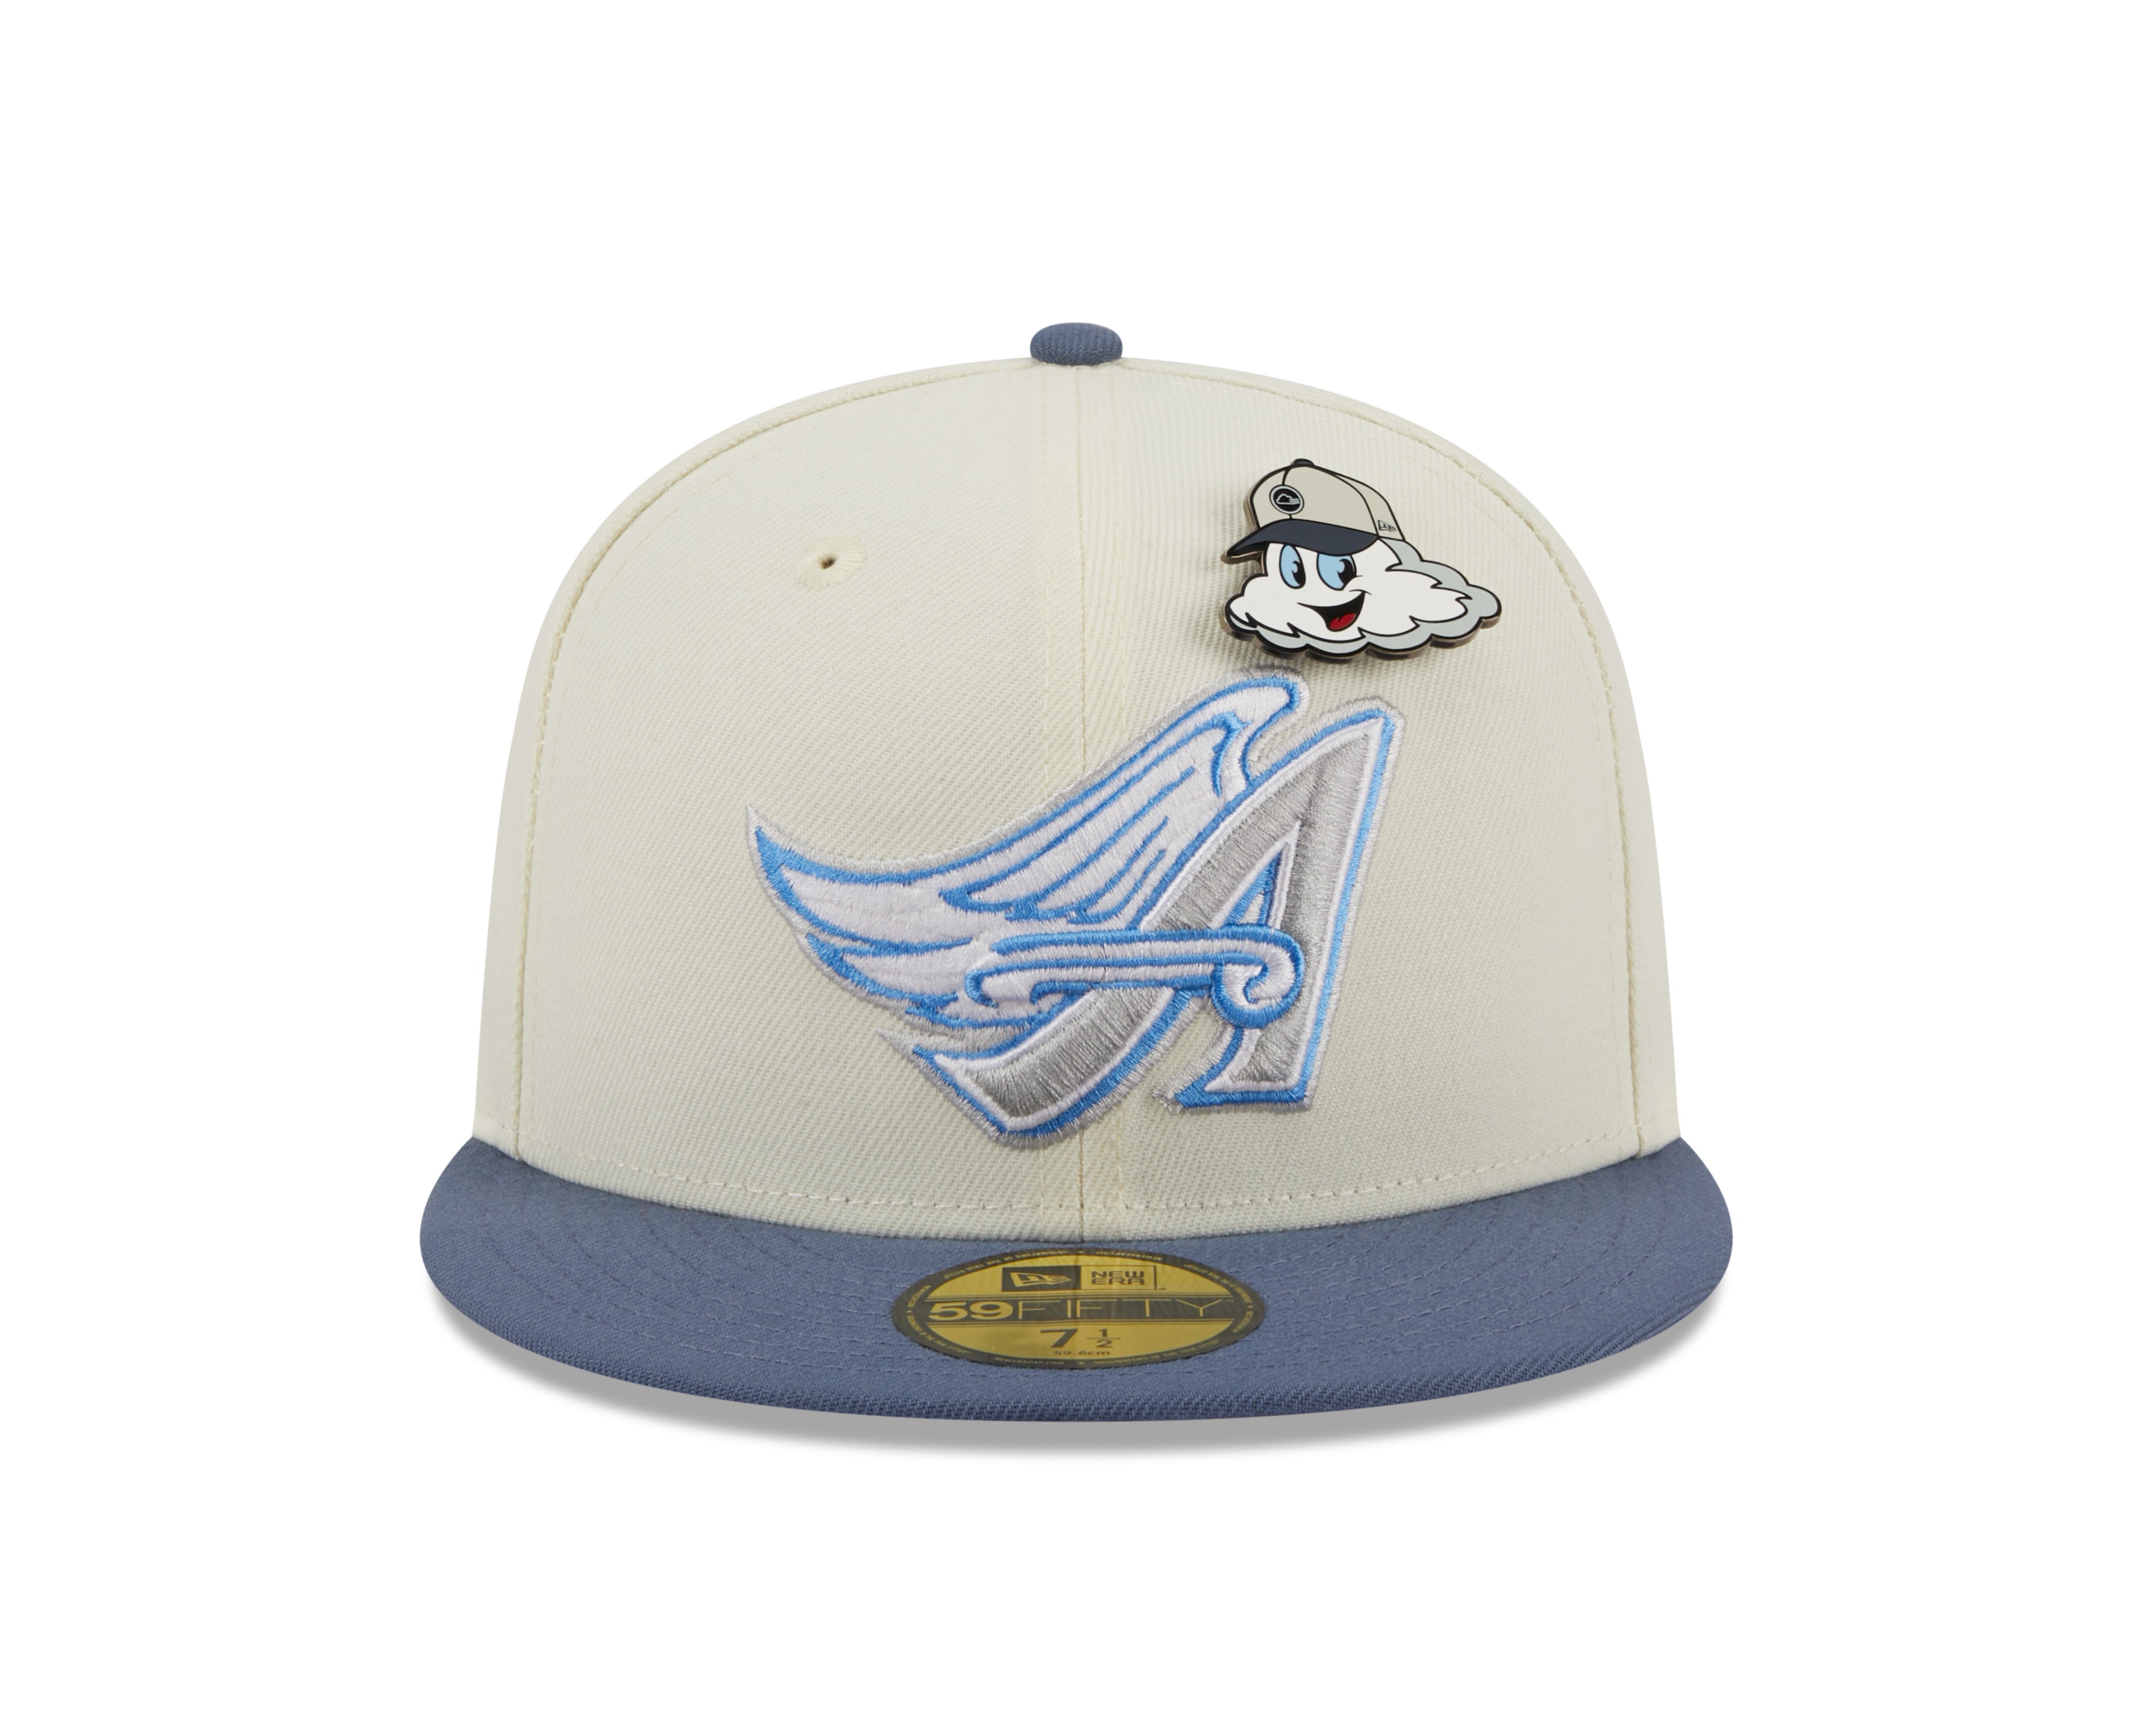 New Era 59fifty Fitted Cap Anaheim Angels Cooperstown THE ELEMENTS - Chrome White/Blue - Headz Up 